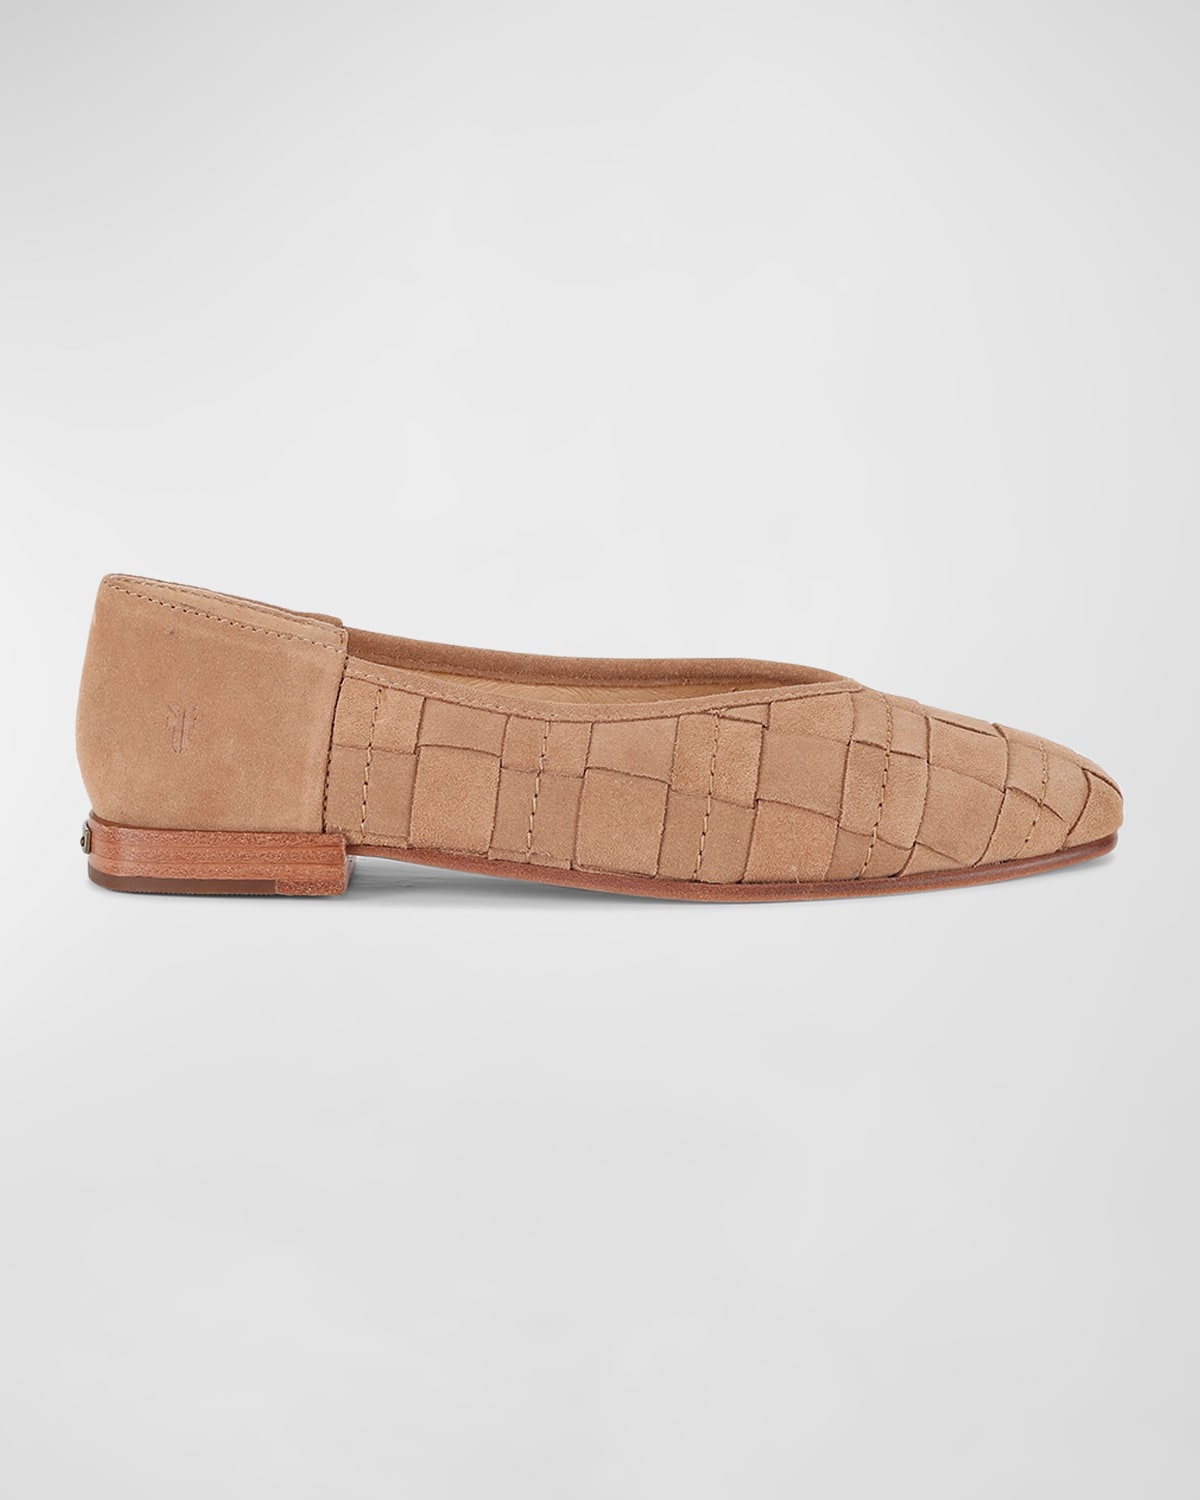 Frye Claire Woven Suede Ballerina Flats In Camel